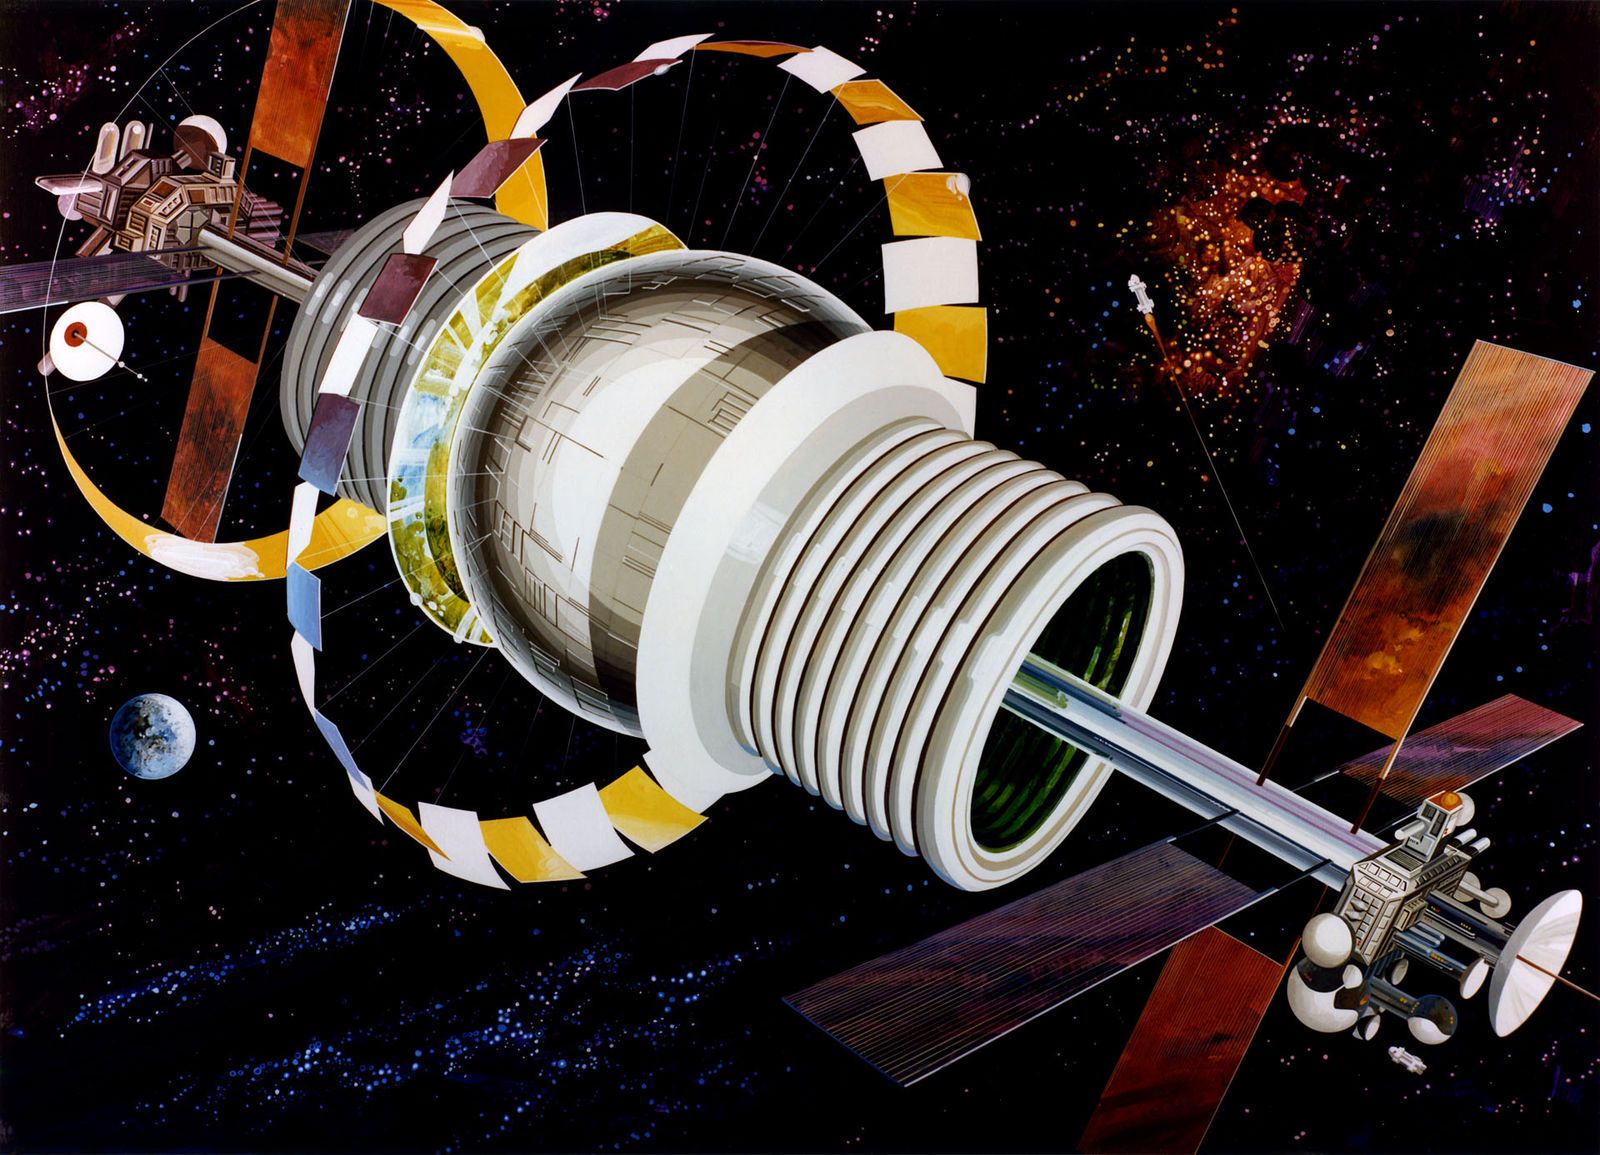 Space station concept images image 9